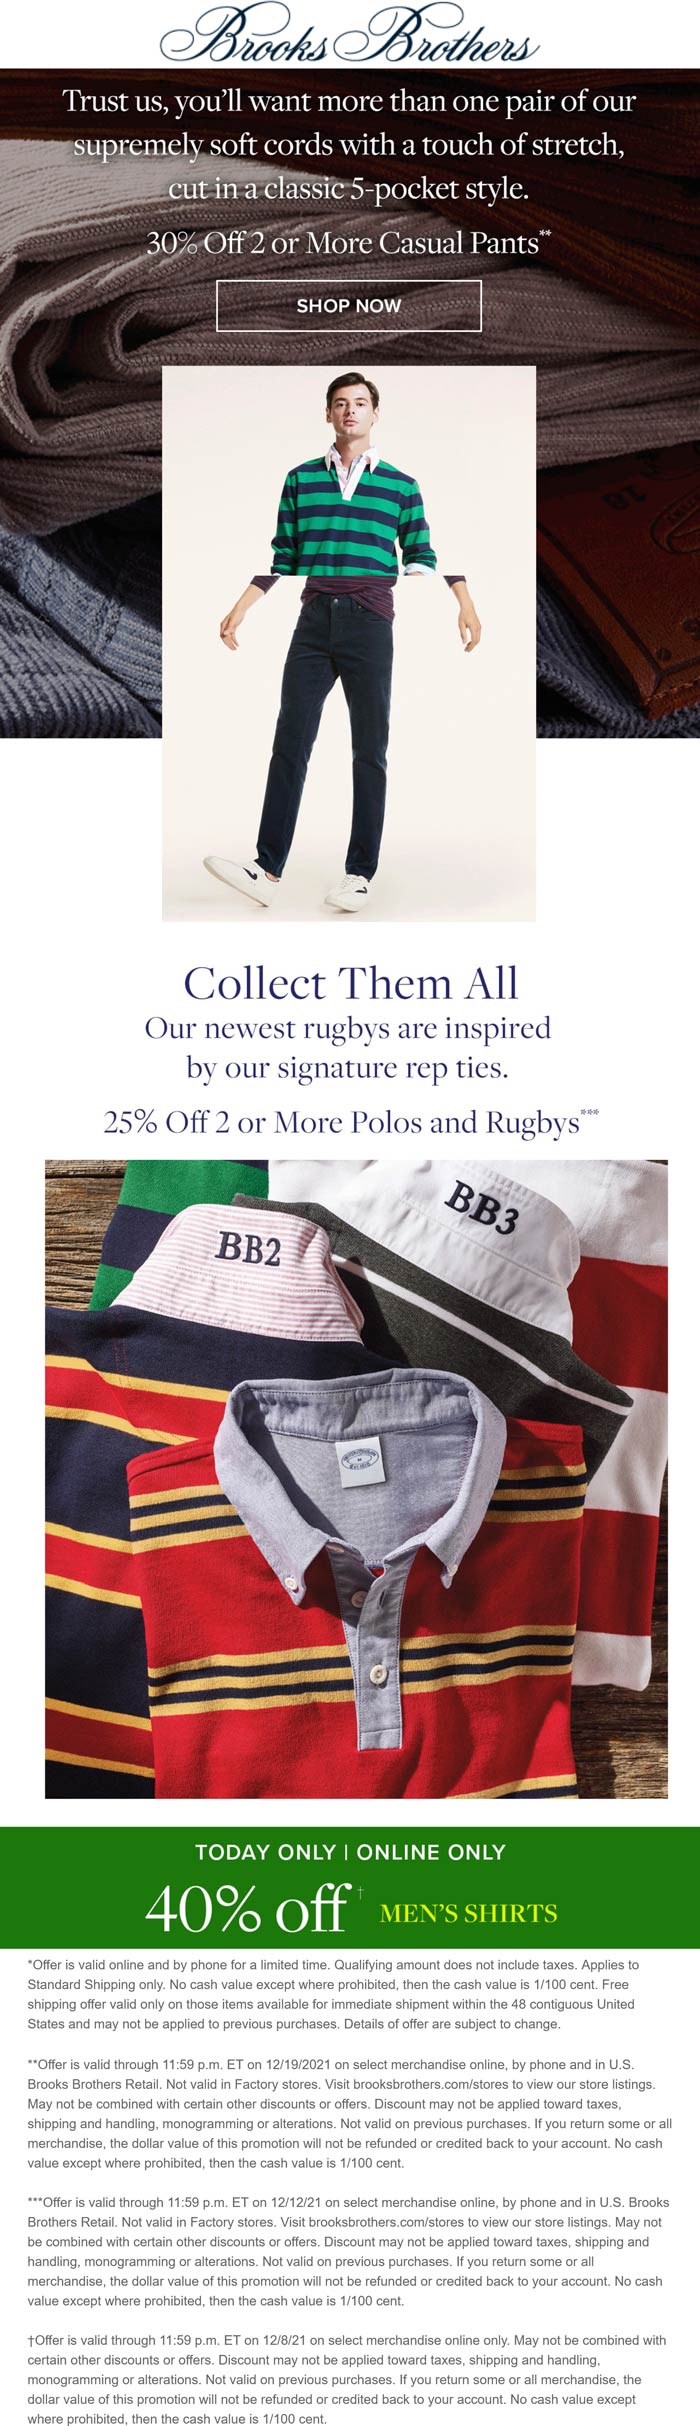 Brooks Brothers stores Coupon  30% off pants, 25% off 2+ polos & more at Brooks Brothers #brooksbrothers 